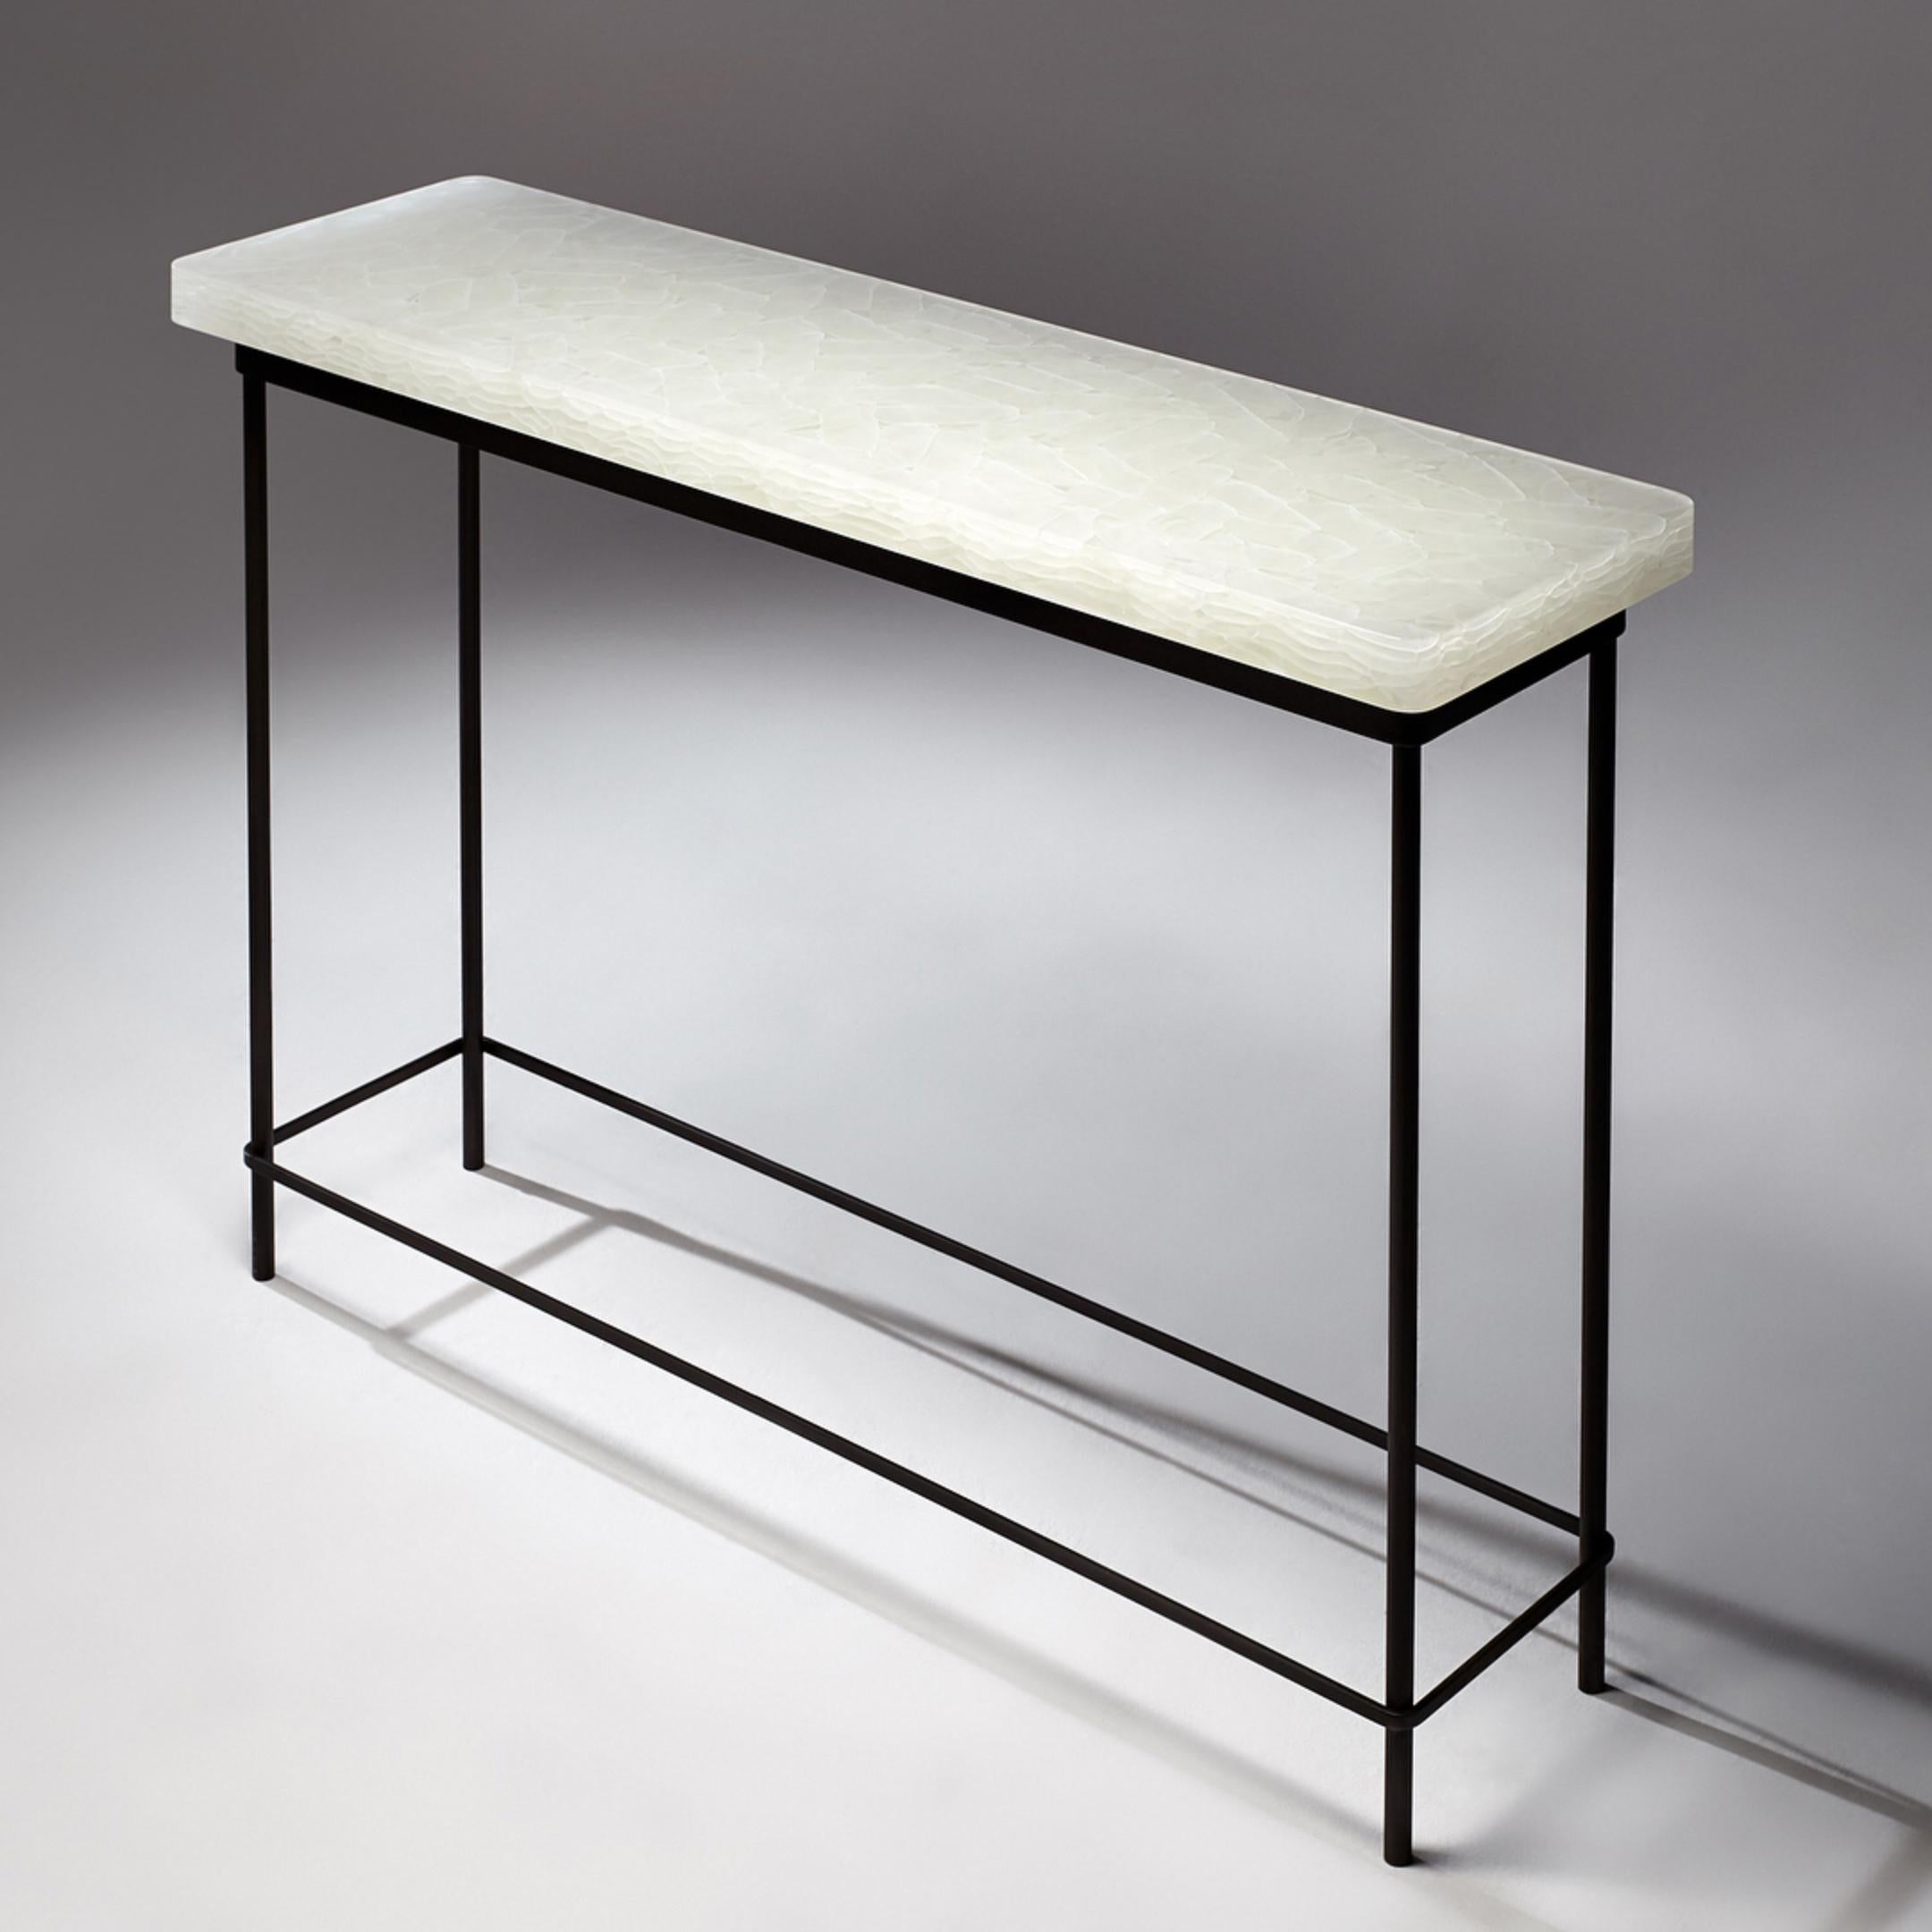 Stilts Console Table by The GoodMan Studio
Dimensions: W 36 x D 127 x H 84 cm
Materials: Metal, Glass, Steel

Kilncast and polished Glass and Steel Table base

The Goodman Studio has been internationally recognized for its modern blown glass